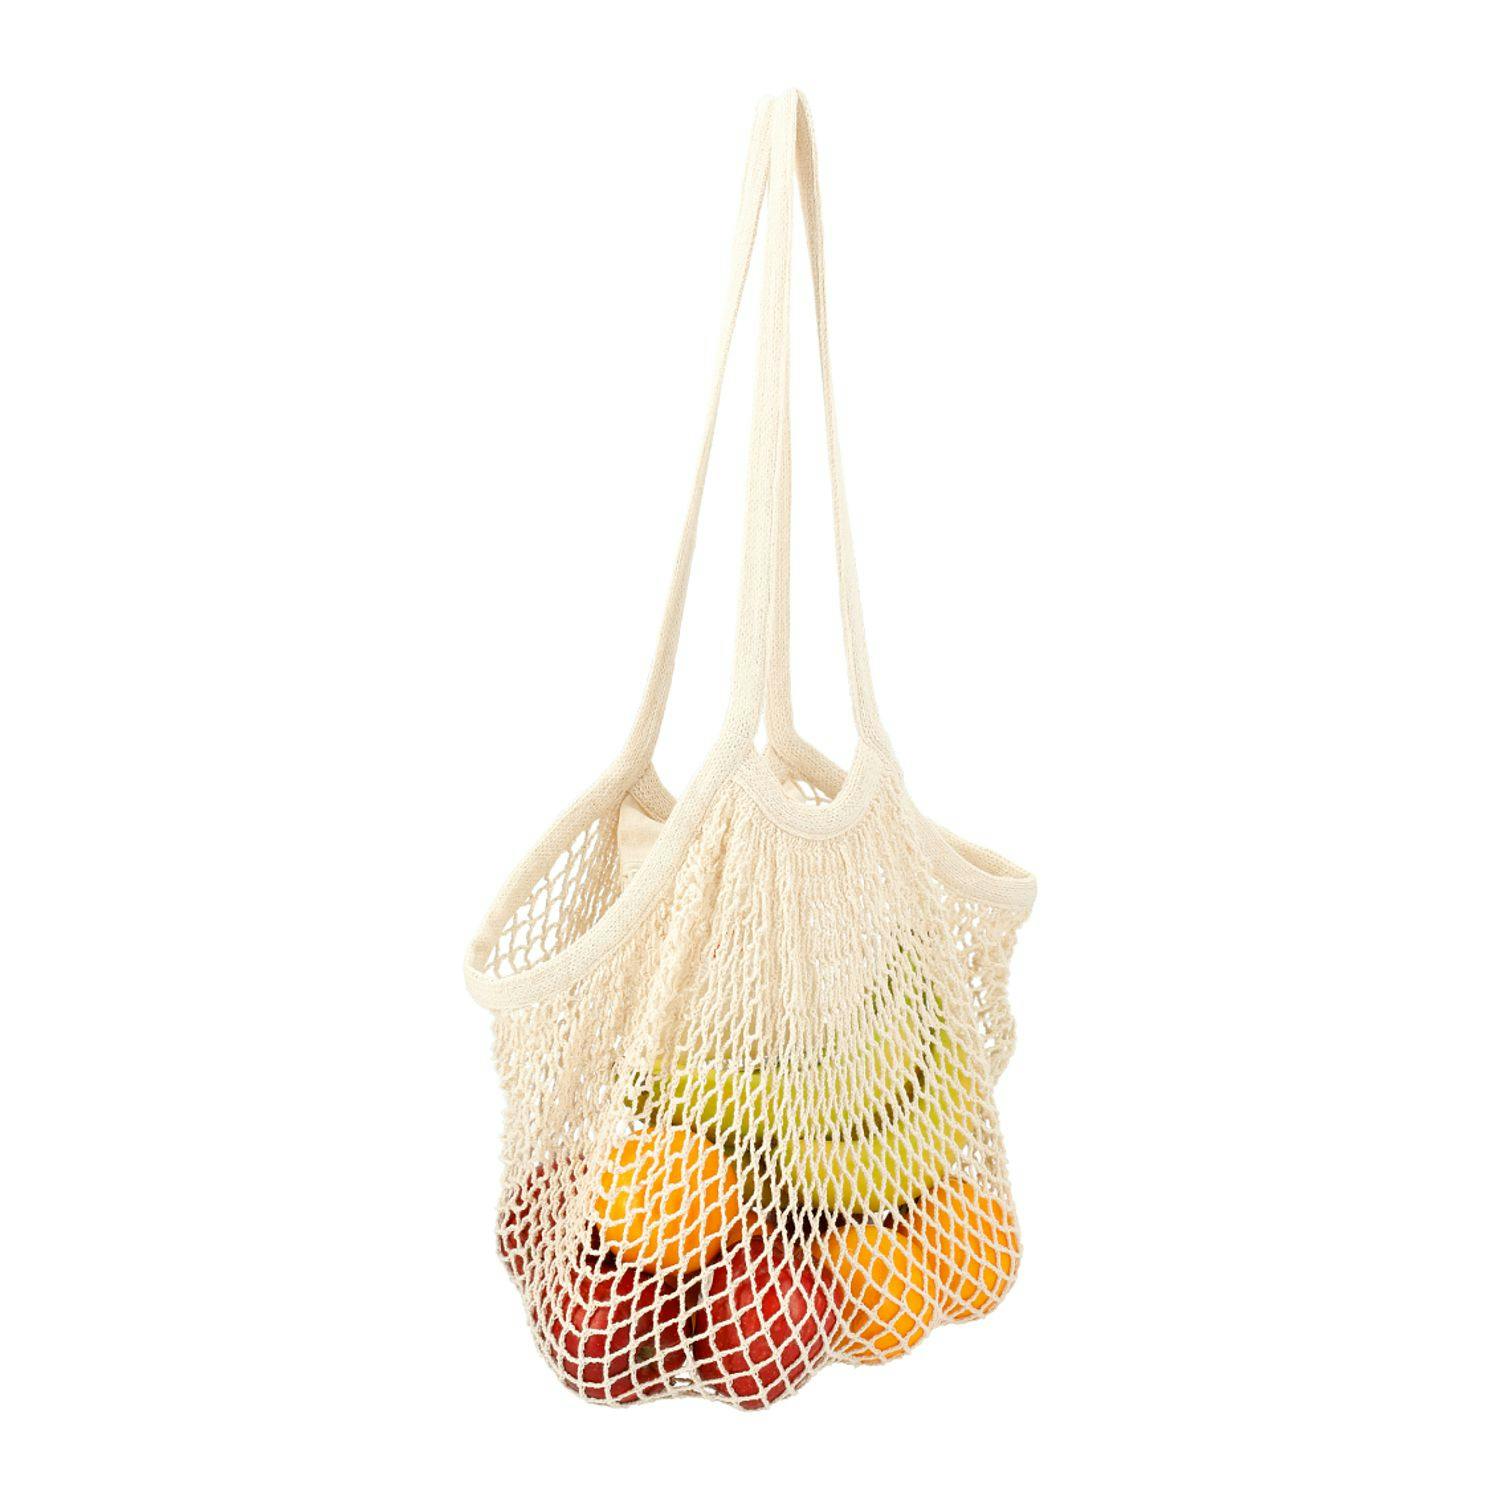 Riviera Cotton Mesh Market Bag w/Zippered Pouch - additional Image 3